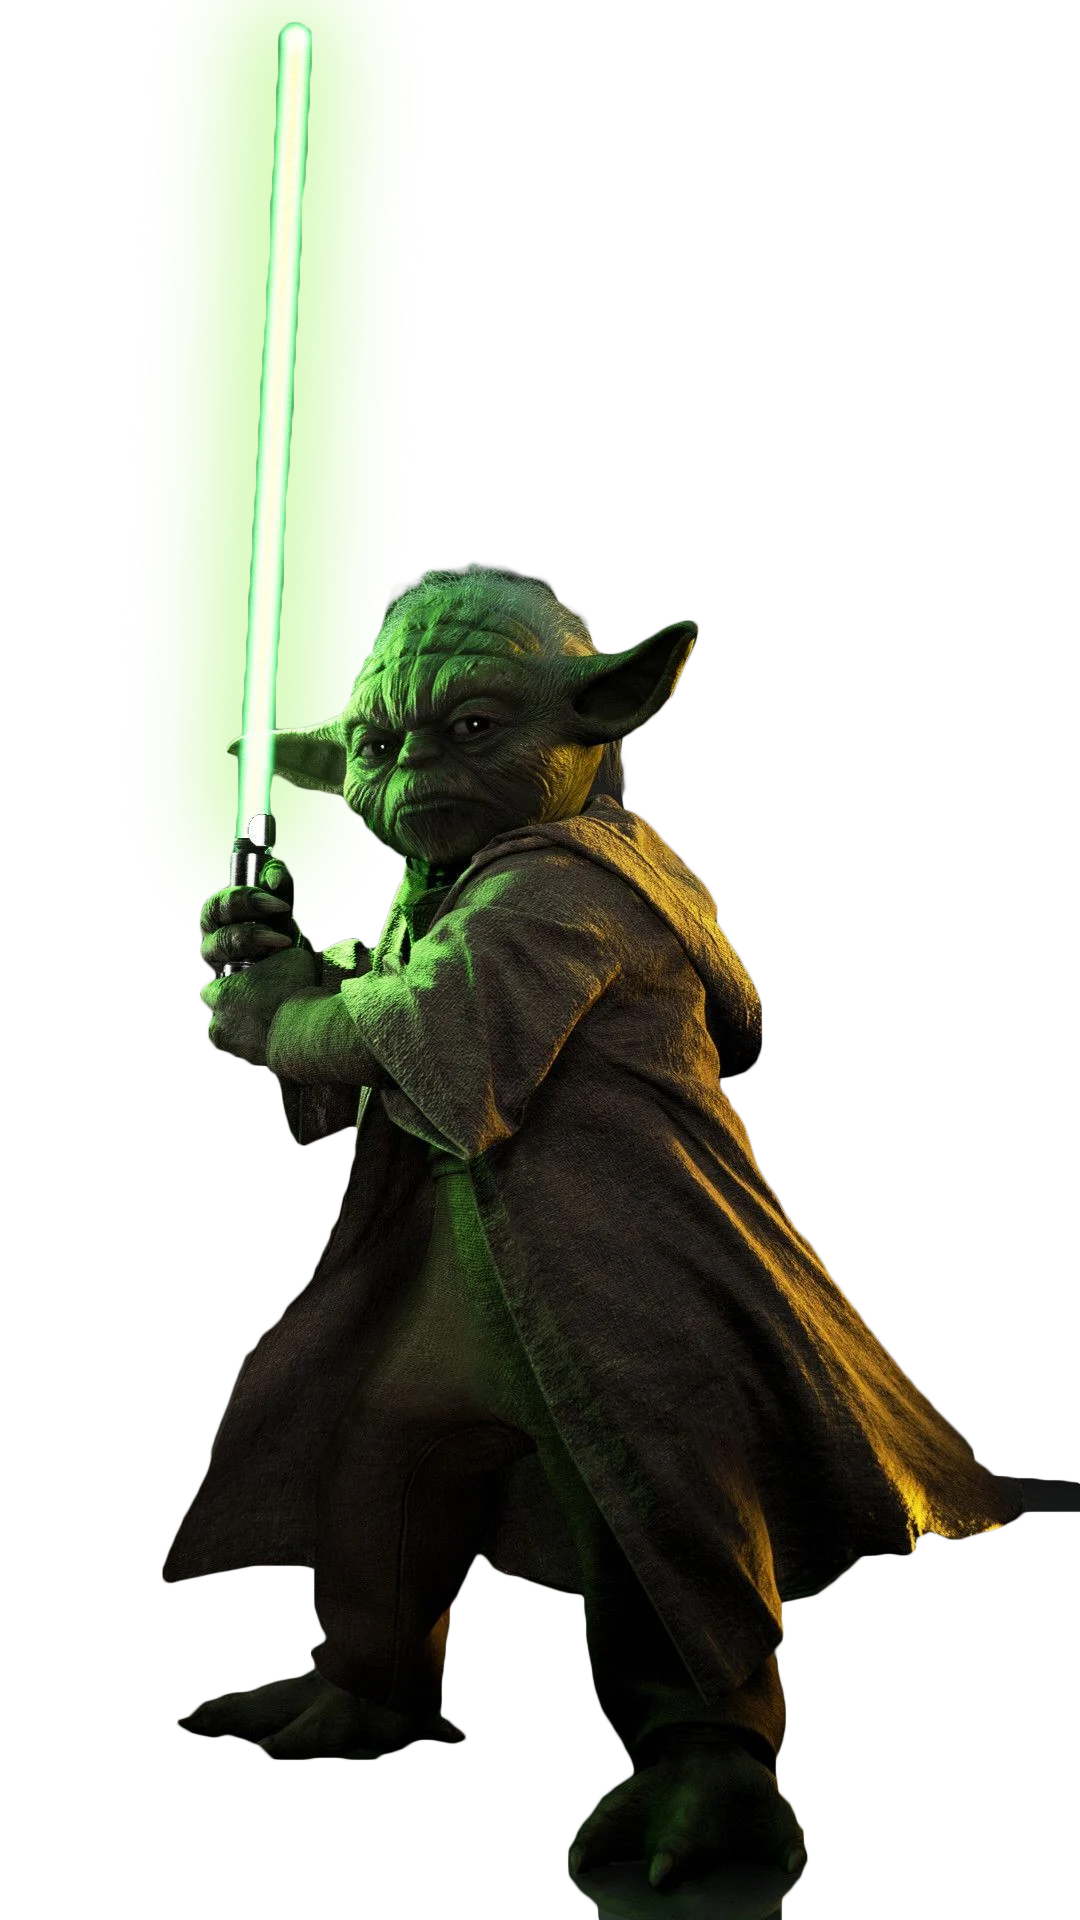 yoda holding his lightsabre up, the glow highlighting an angry look on his face